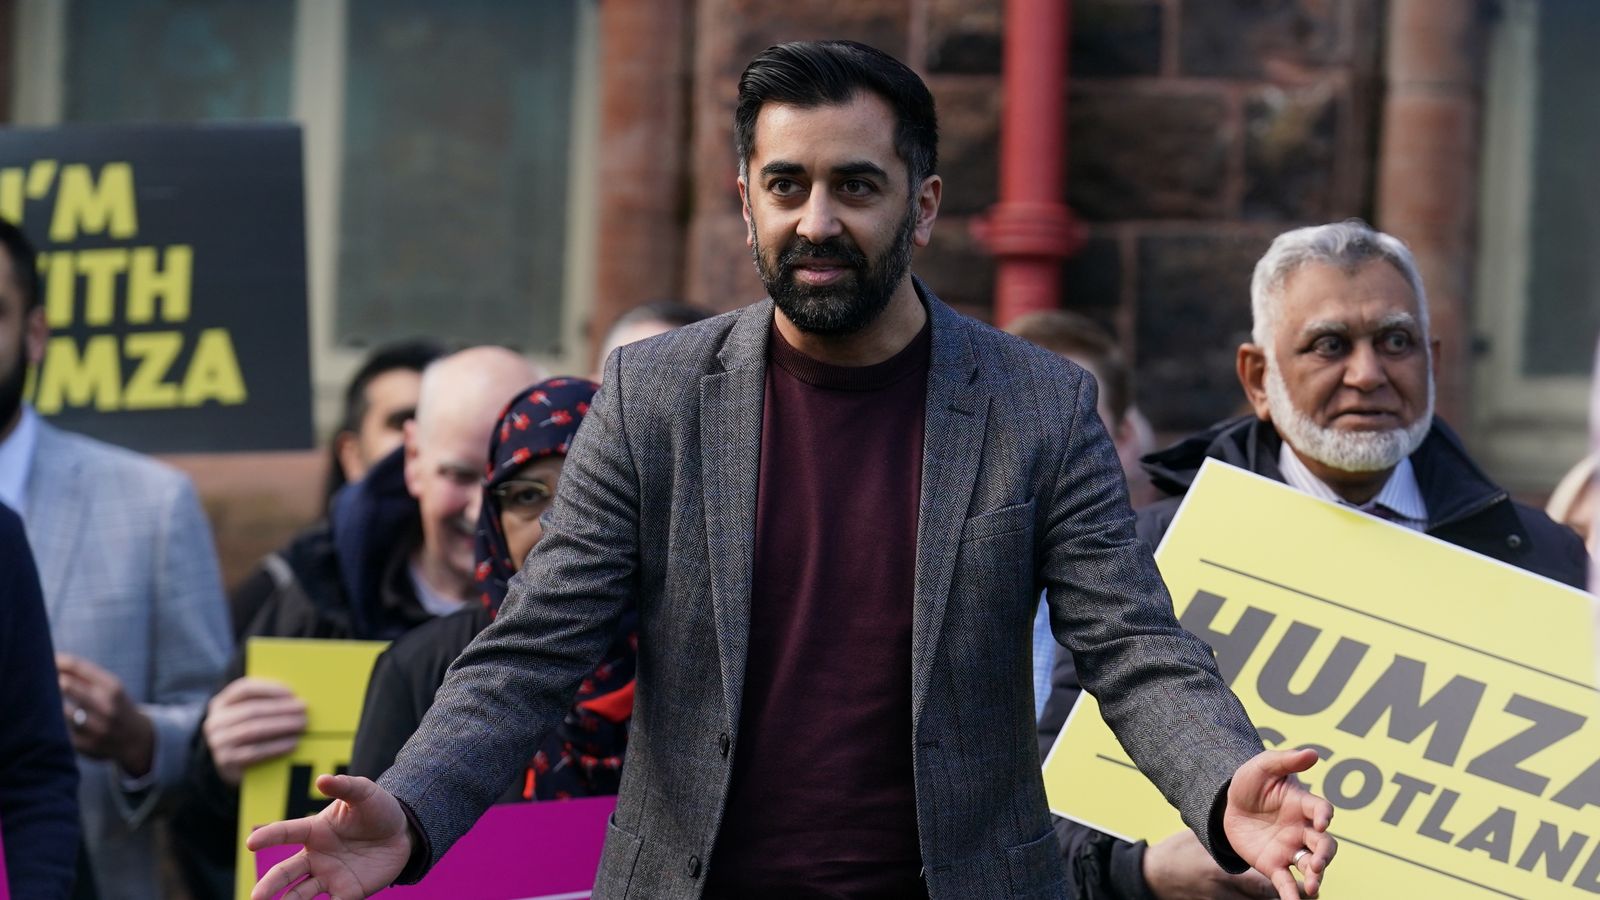 SNP leadership: Ian Blackford latest to endorse Humza Yousaf as first minister